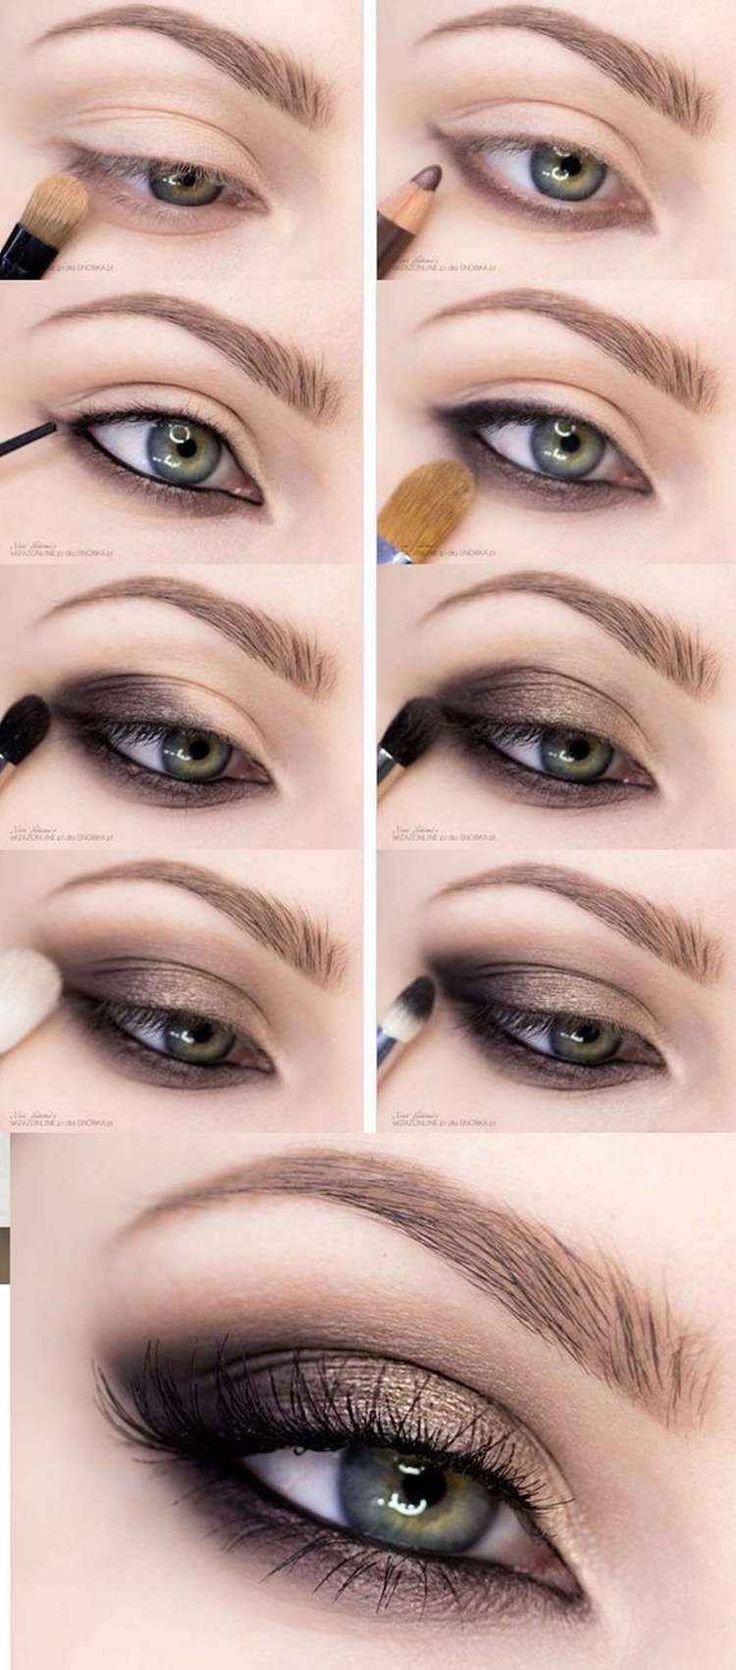 Top conseils pour réussir son maquillage smoky eyes